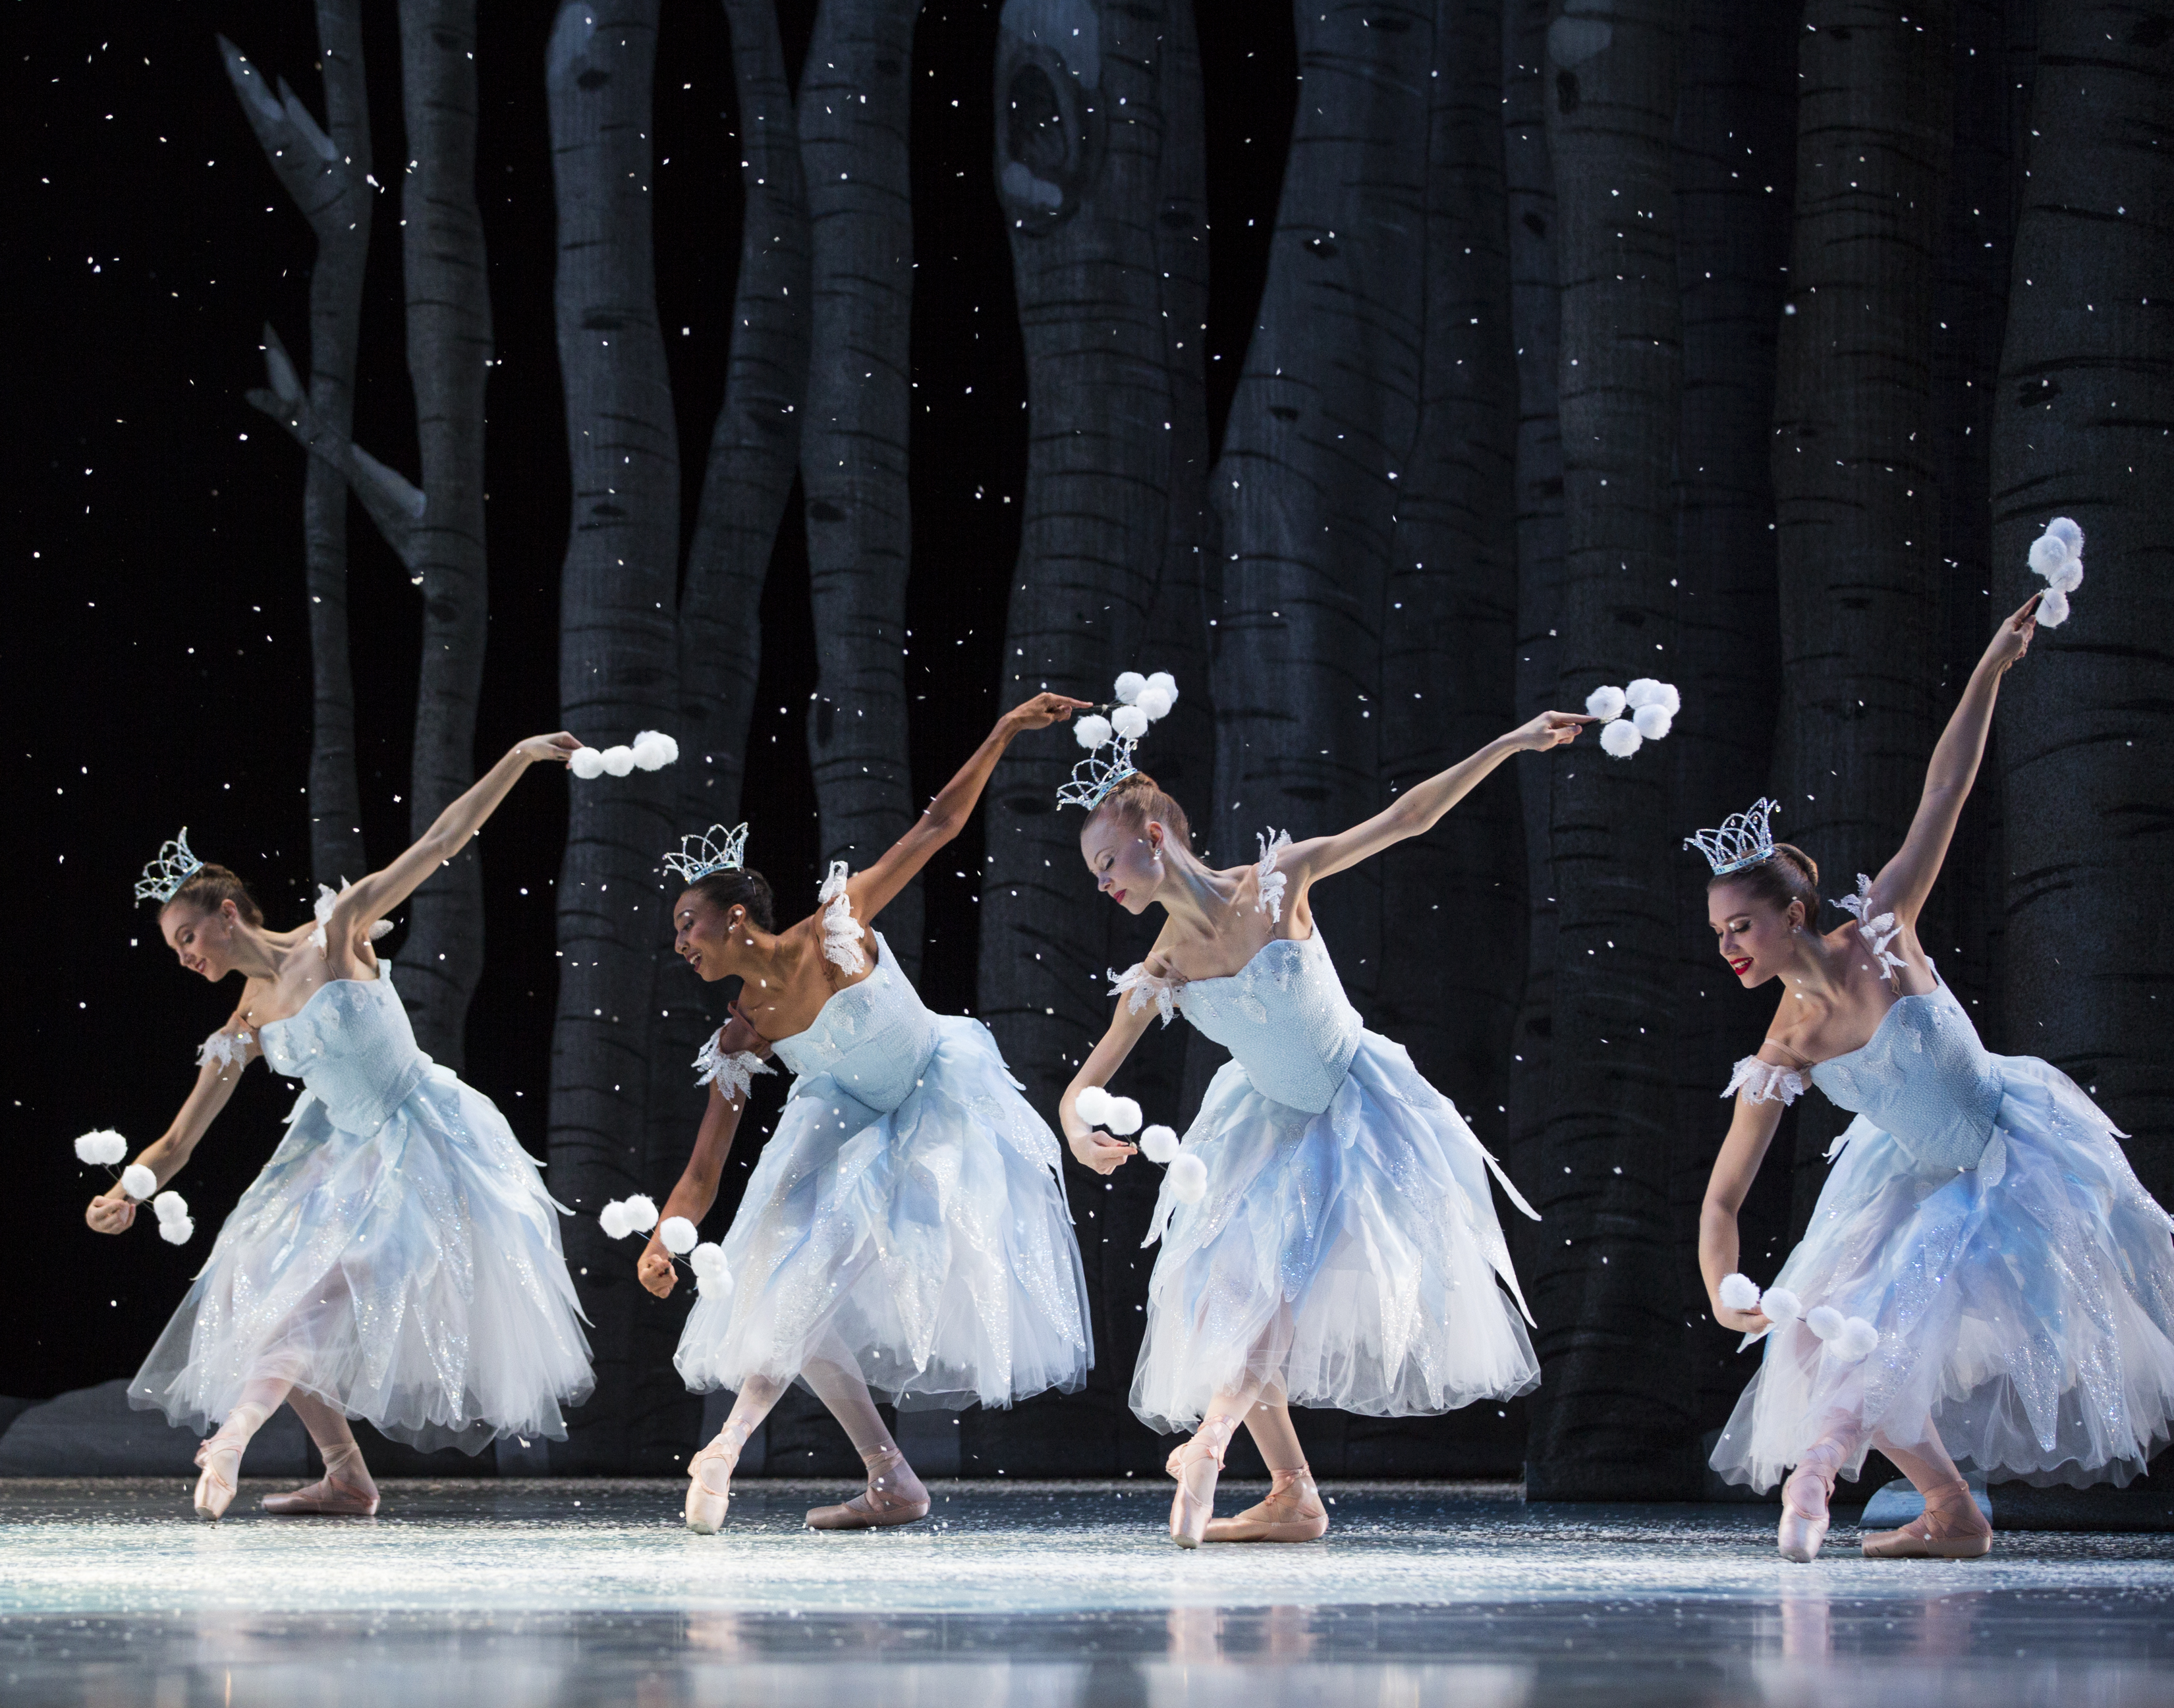 Pacific Northwest Ballet company dancers in the snow scene from George Balanchine’s The Nutcracker®, choreographed by George Balanchine © The George Balanchine Trust. PNB’s production features sets and costumes designed by children’s author and illustrator Ian Falconer (Olivia the Pig) and runs November 25 – December 28, 2016. Photo © Angela Sterling.